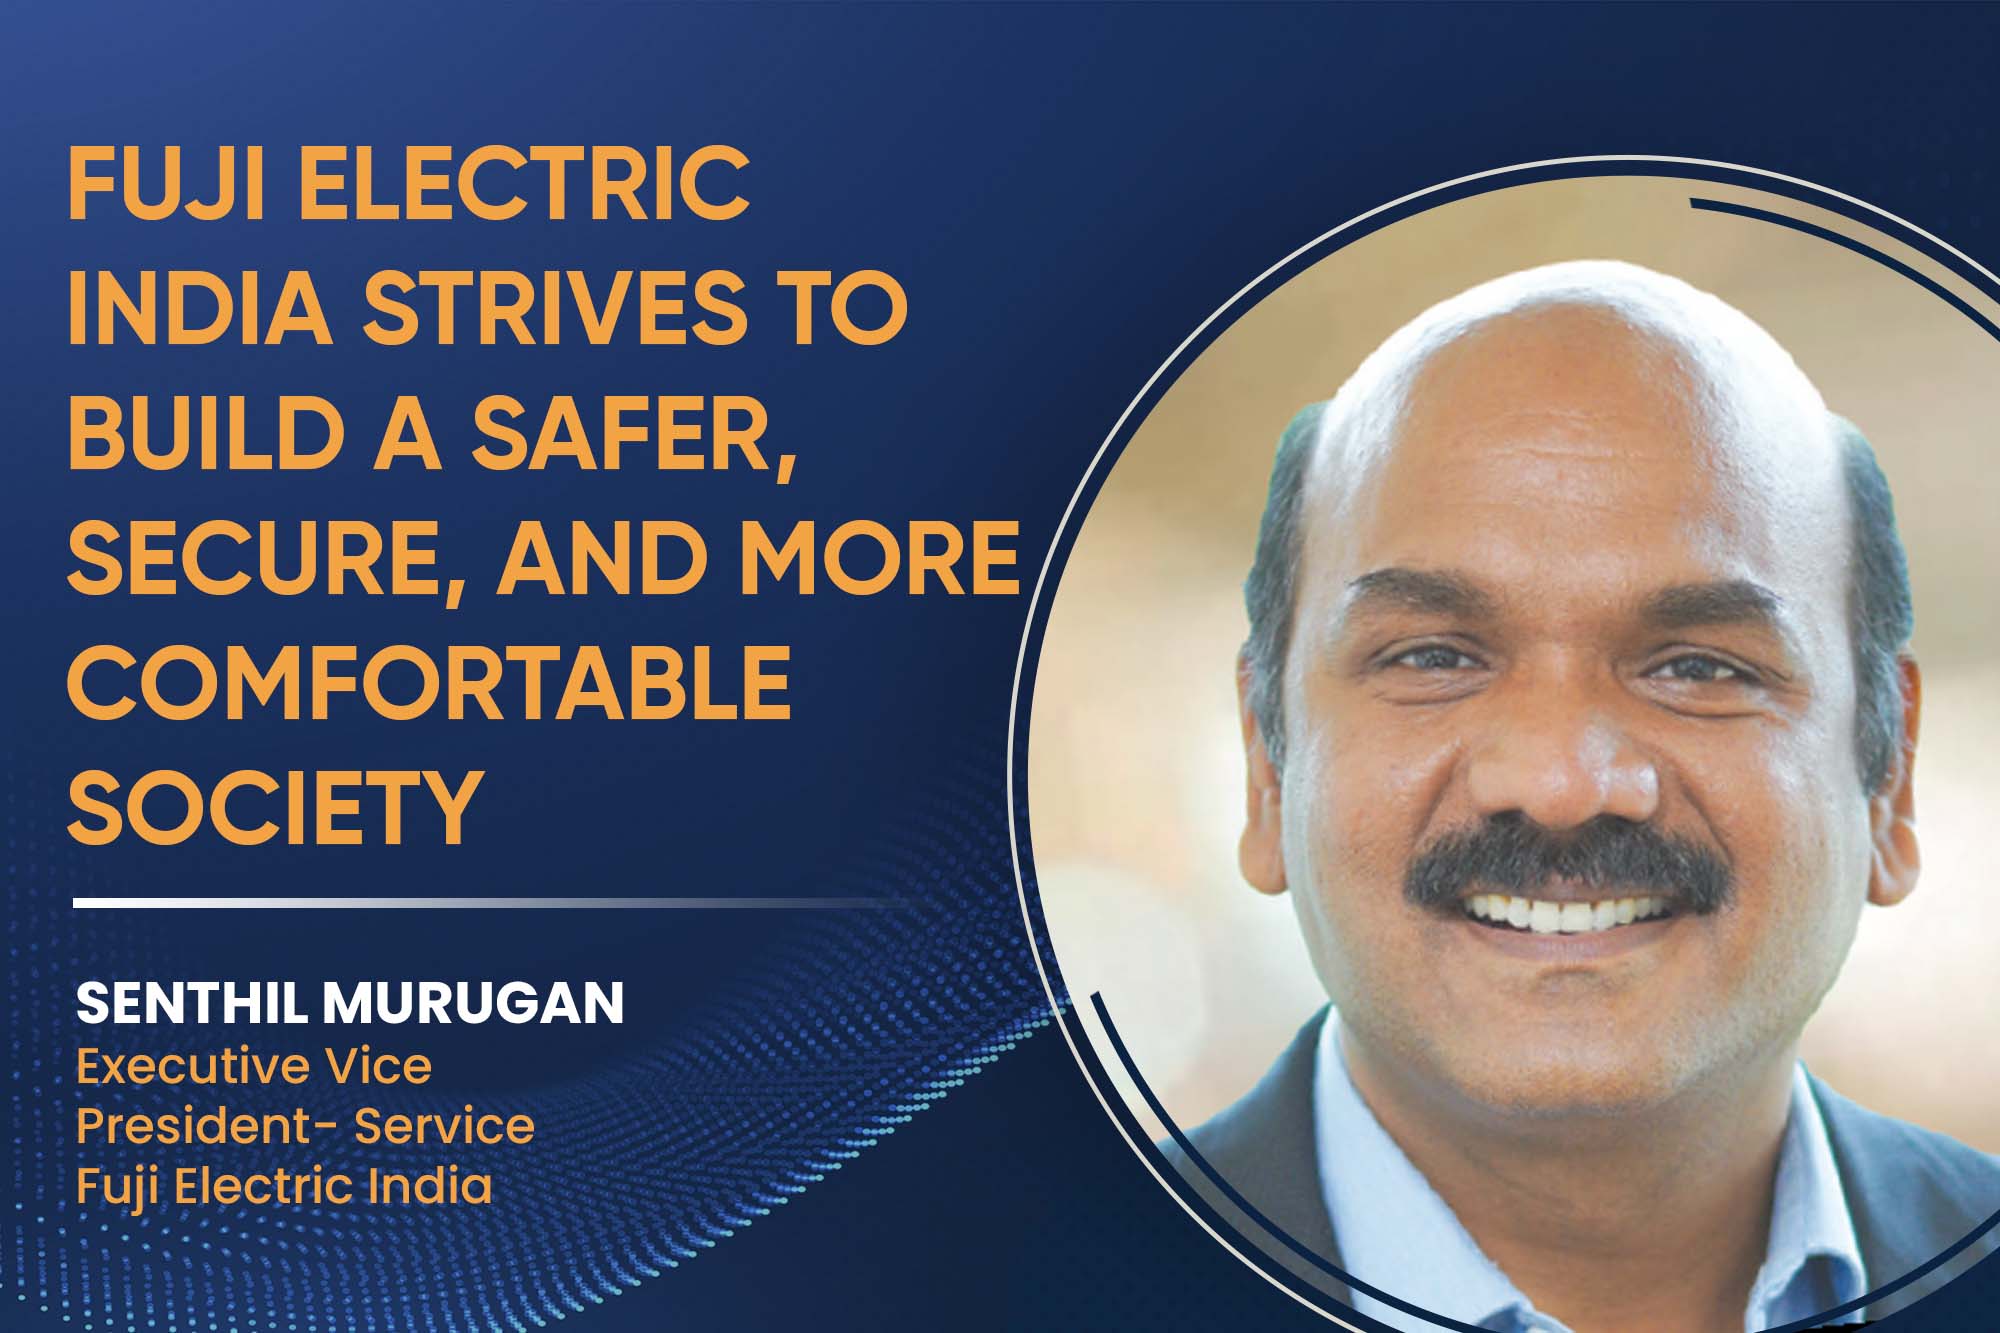 Fuji Electric India strives to build a safer, secure, and more comfortable society